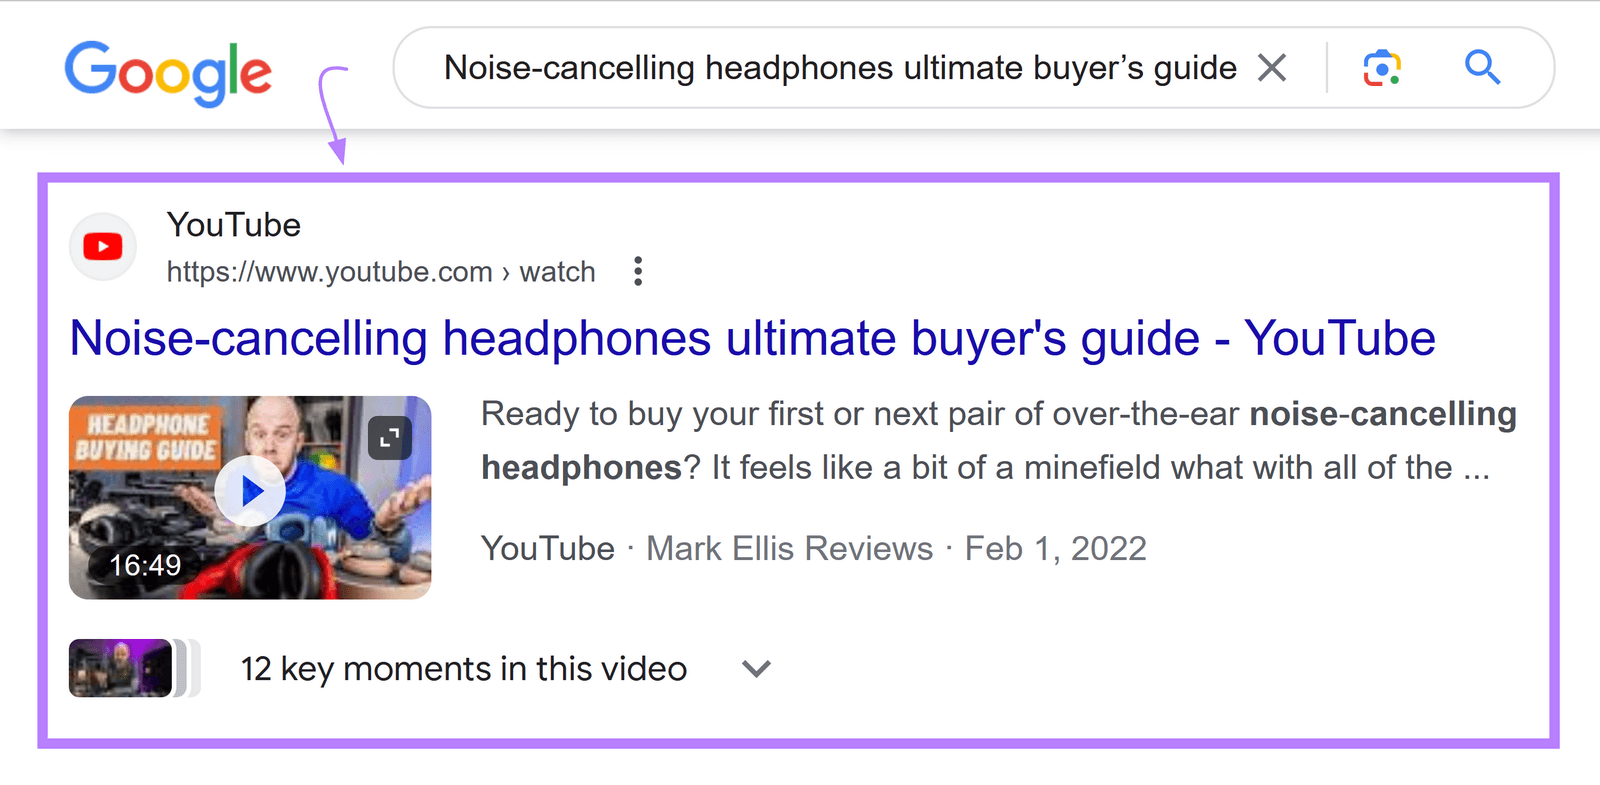 Video result on Google SERP for "noise-canceling headphones ultimate buyer’s guide" search